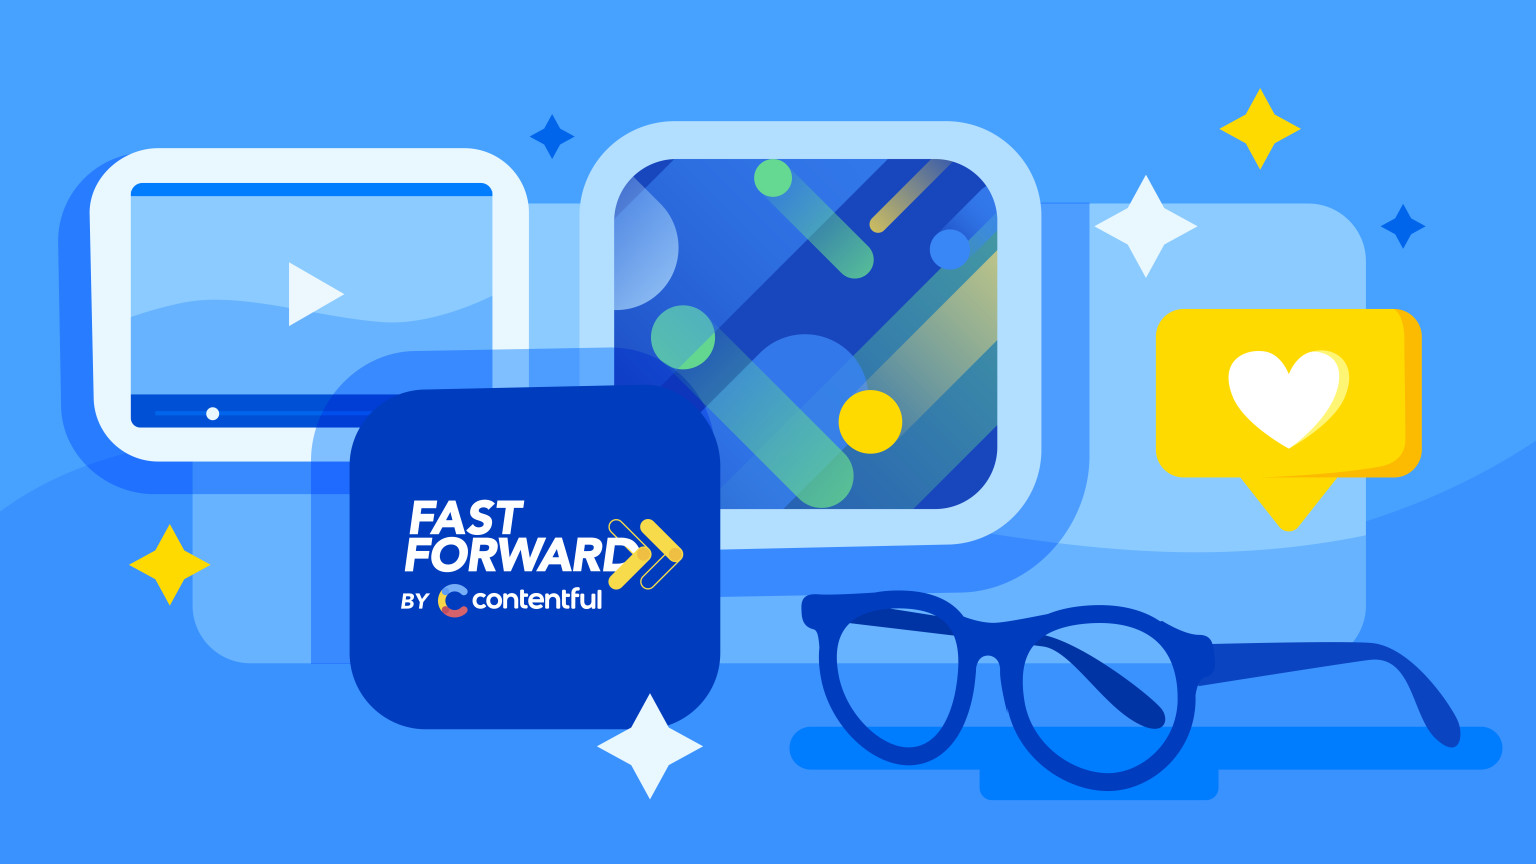 Illustrated graphic with the fast forward logo